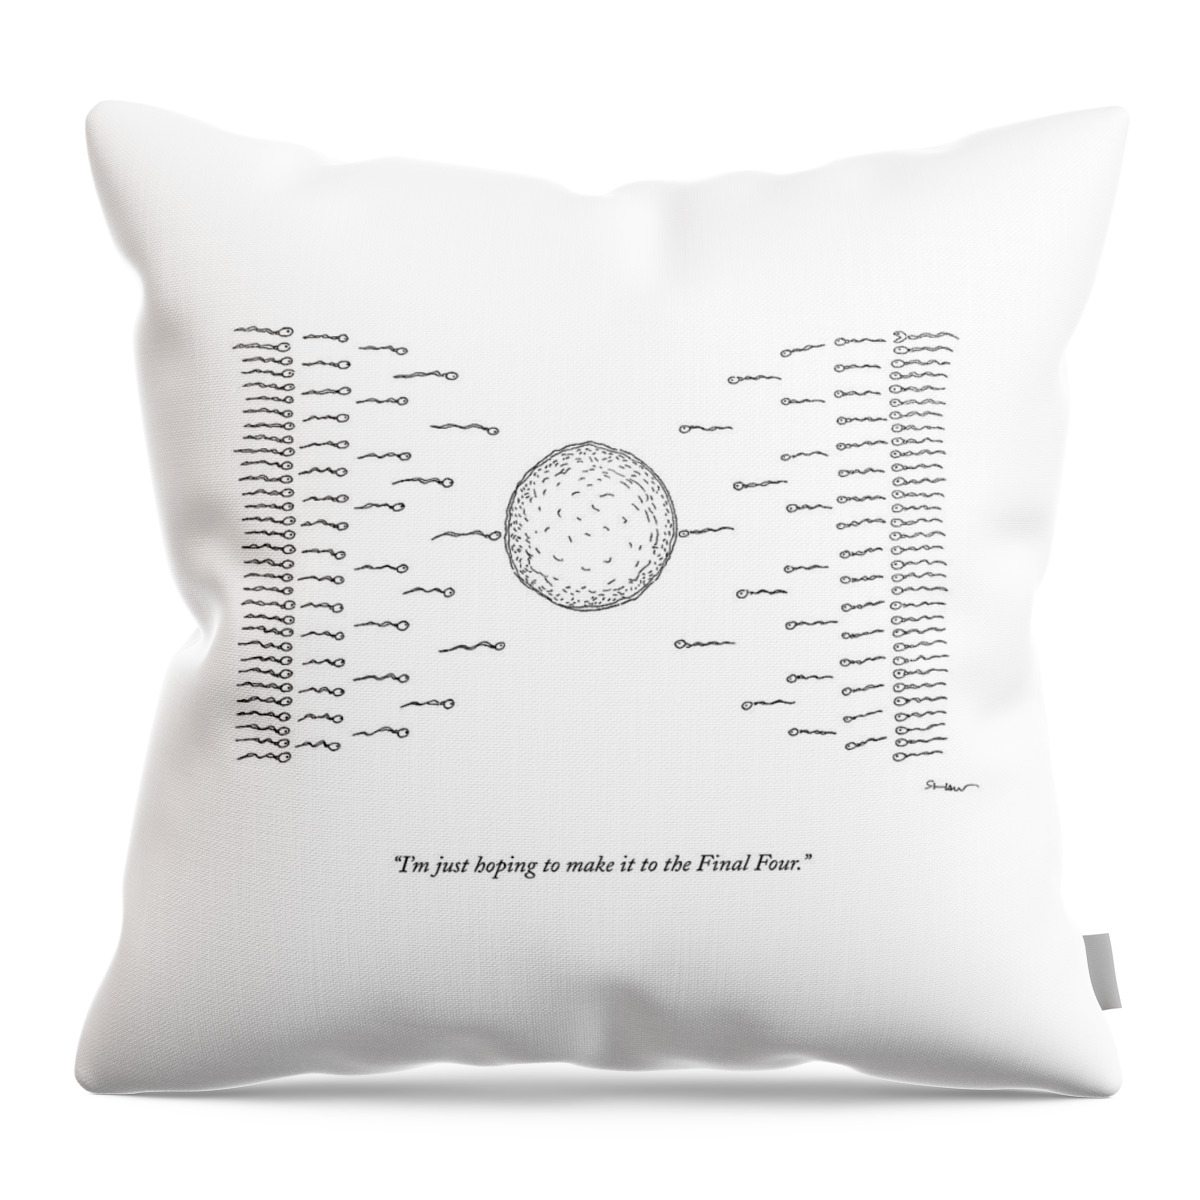 A Number Of Sperms Approach An Egg In The Shape Throw Pillow